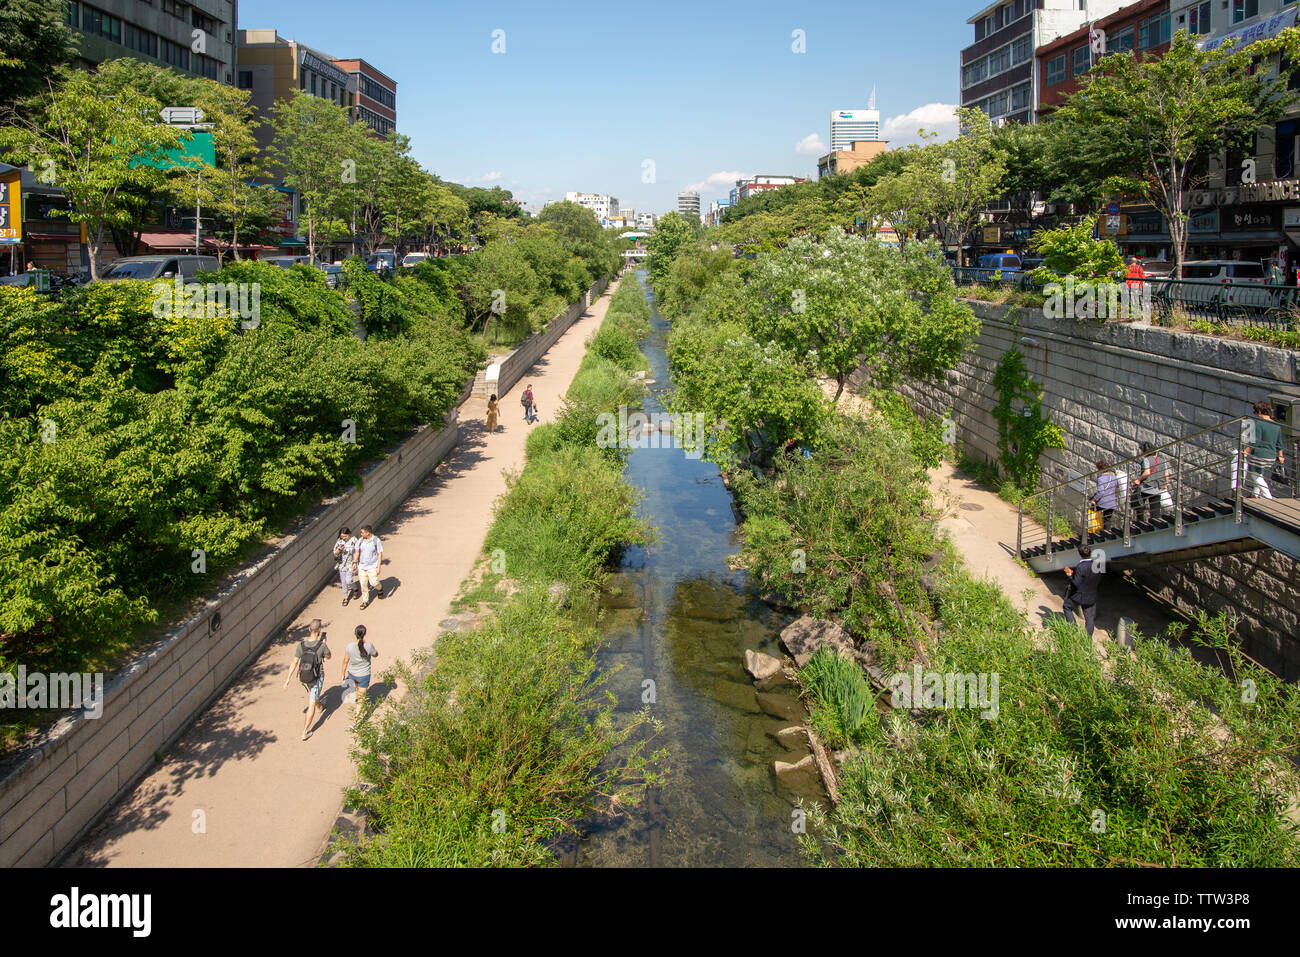 SEOUL, SOUTH KOREA - MAY 31, 2019: People are walking on paths along the Cheonggyecheon stream Stock Photo